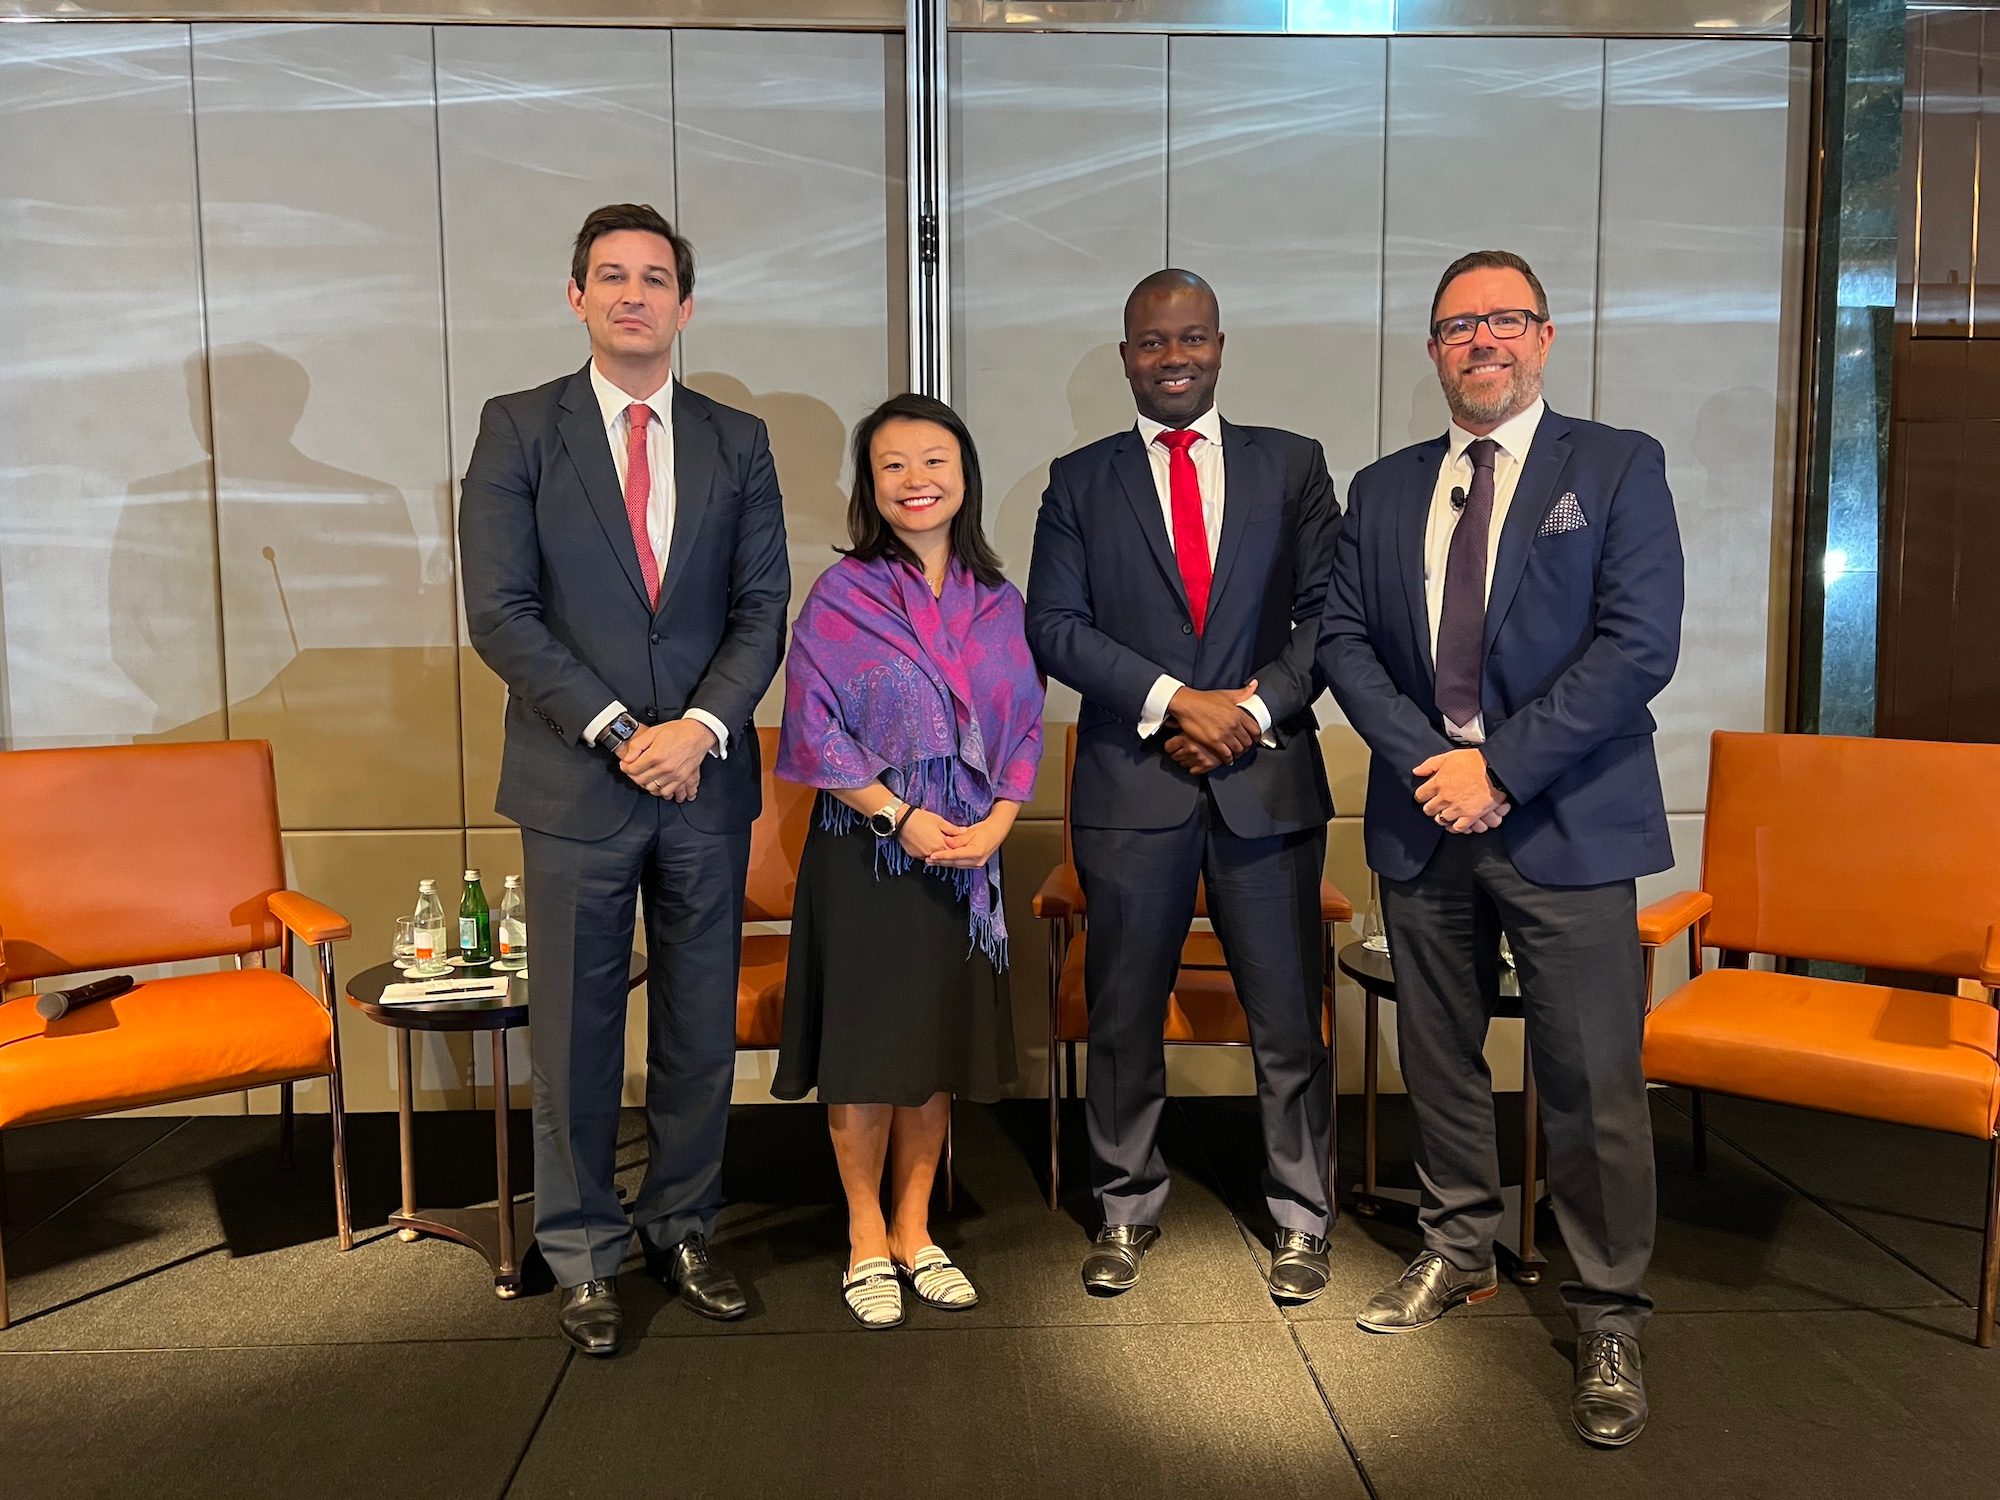 SJP's chief investment officer Justin Onuekwusi, second from right, at the event in Dubai. Other speakers included, from left, Ben Powell of the BlackRock Investment Institute, Angelina Lai of SJP Asia and Middle East, and Robert Willock of the Economist Intelligence Unit